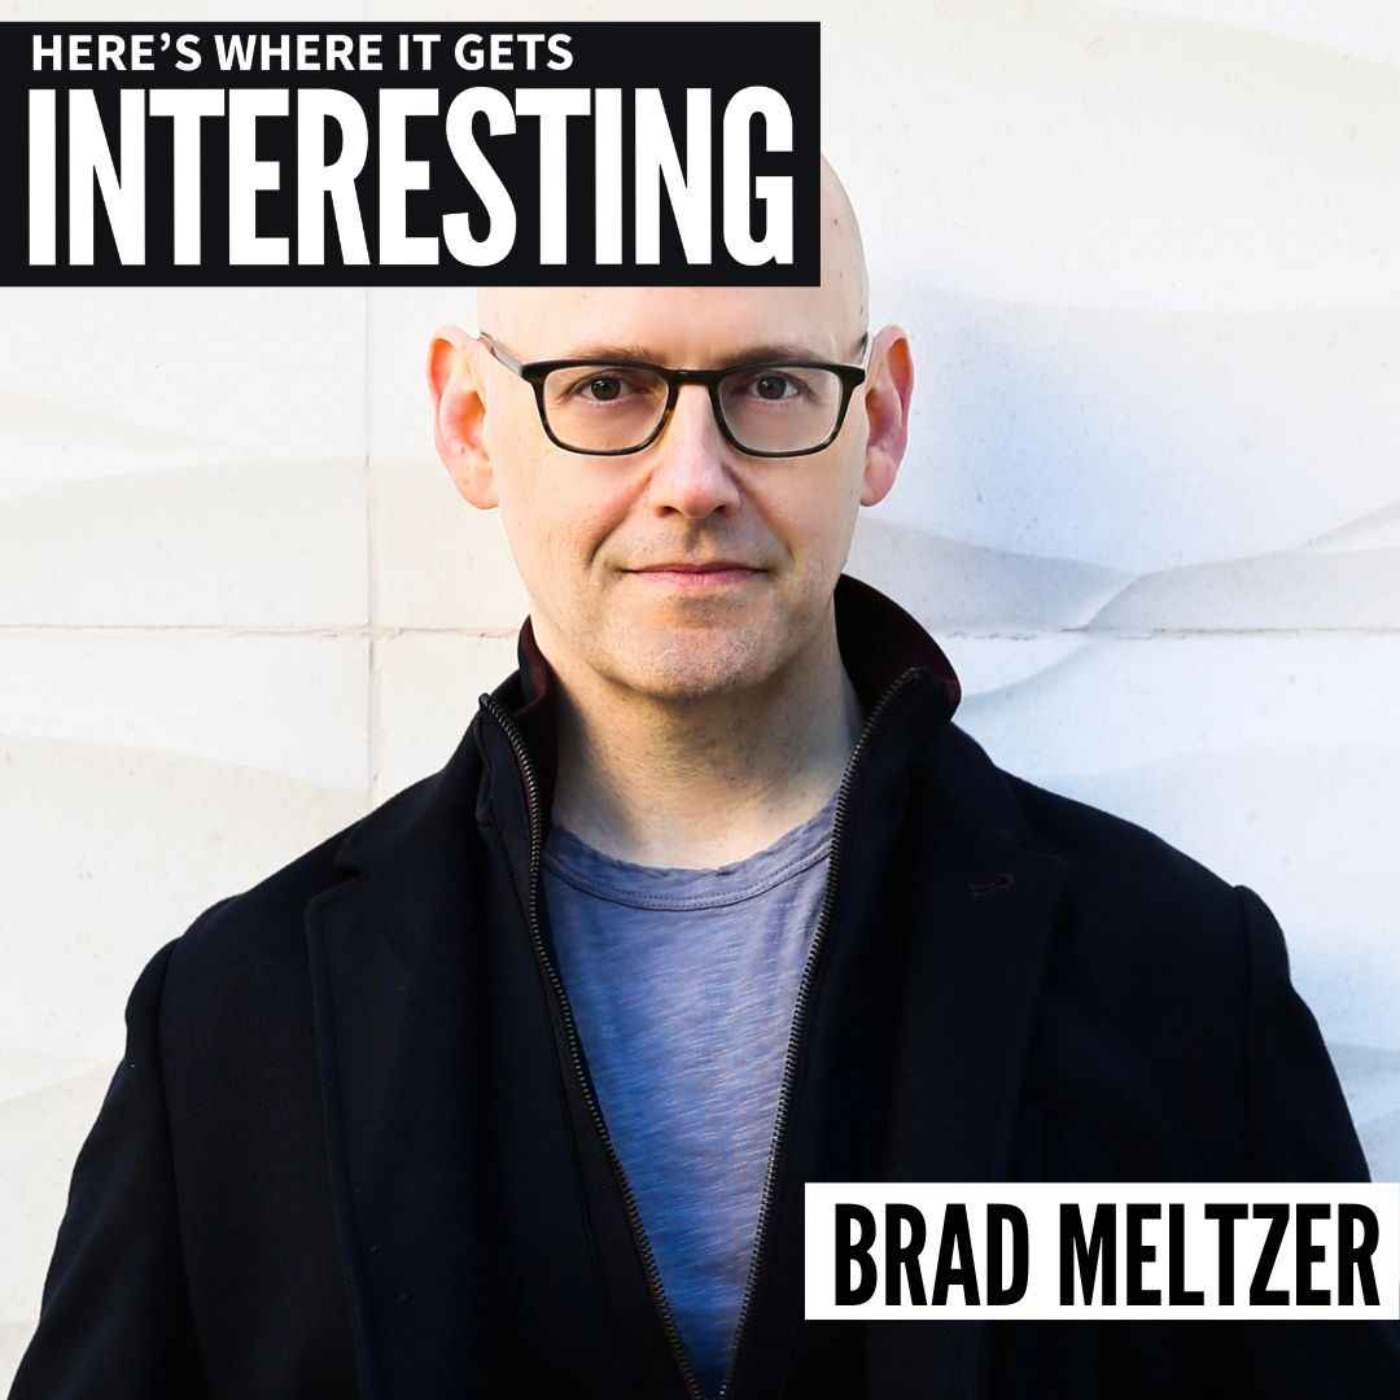 Ordinary People Change the World with Brad Meltzer